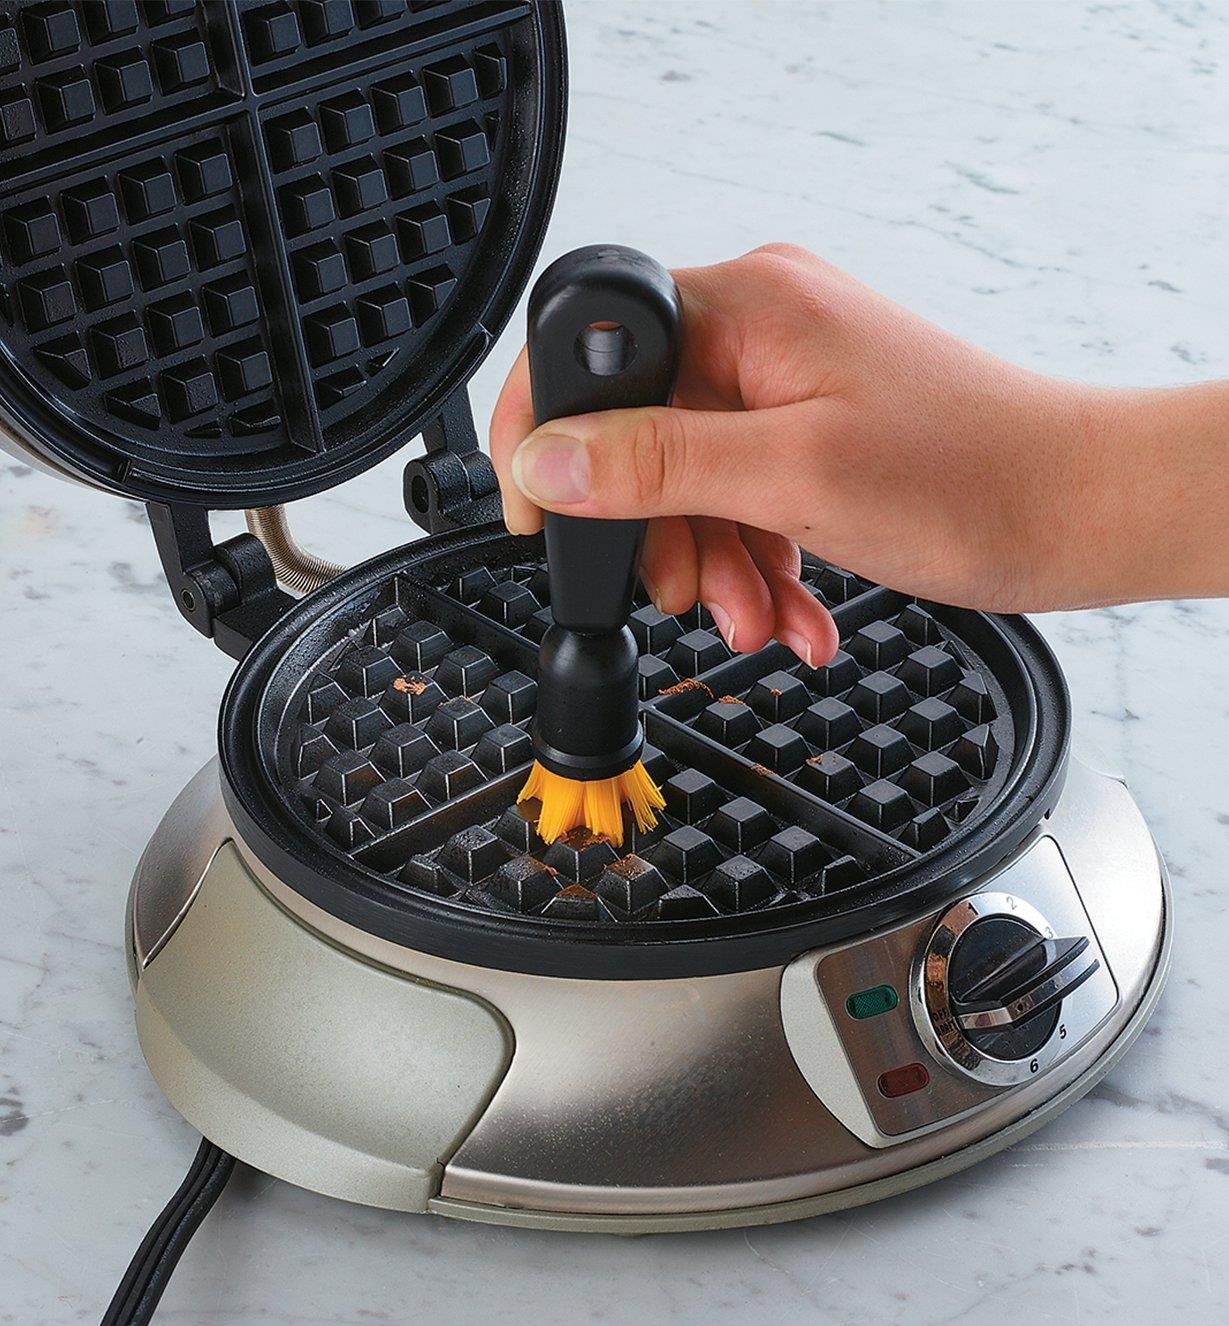 Using the brush with plastic bristles to clean a waffle iron